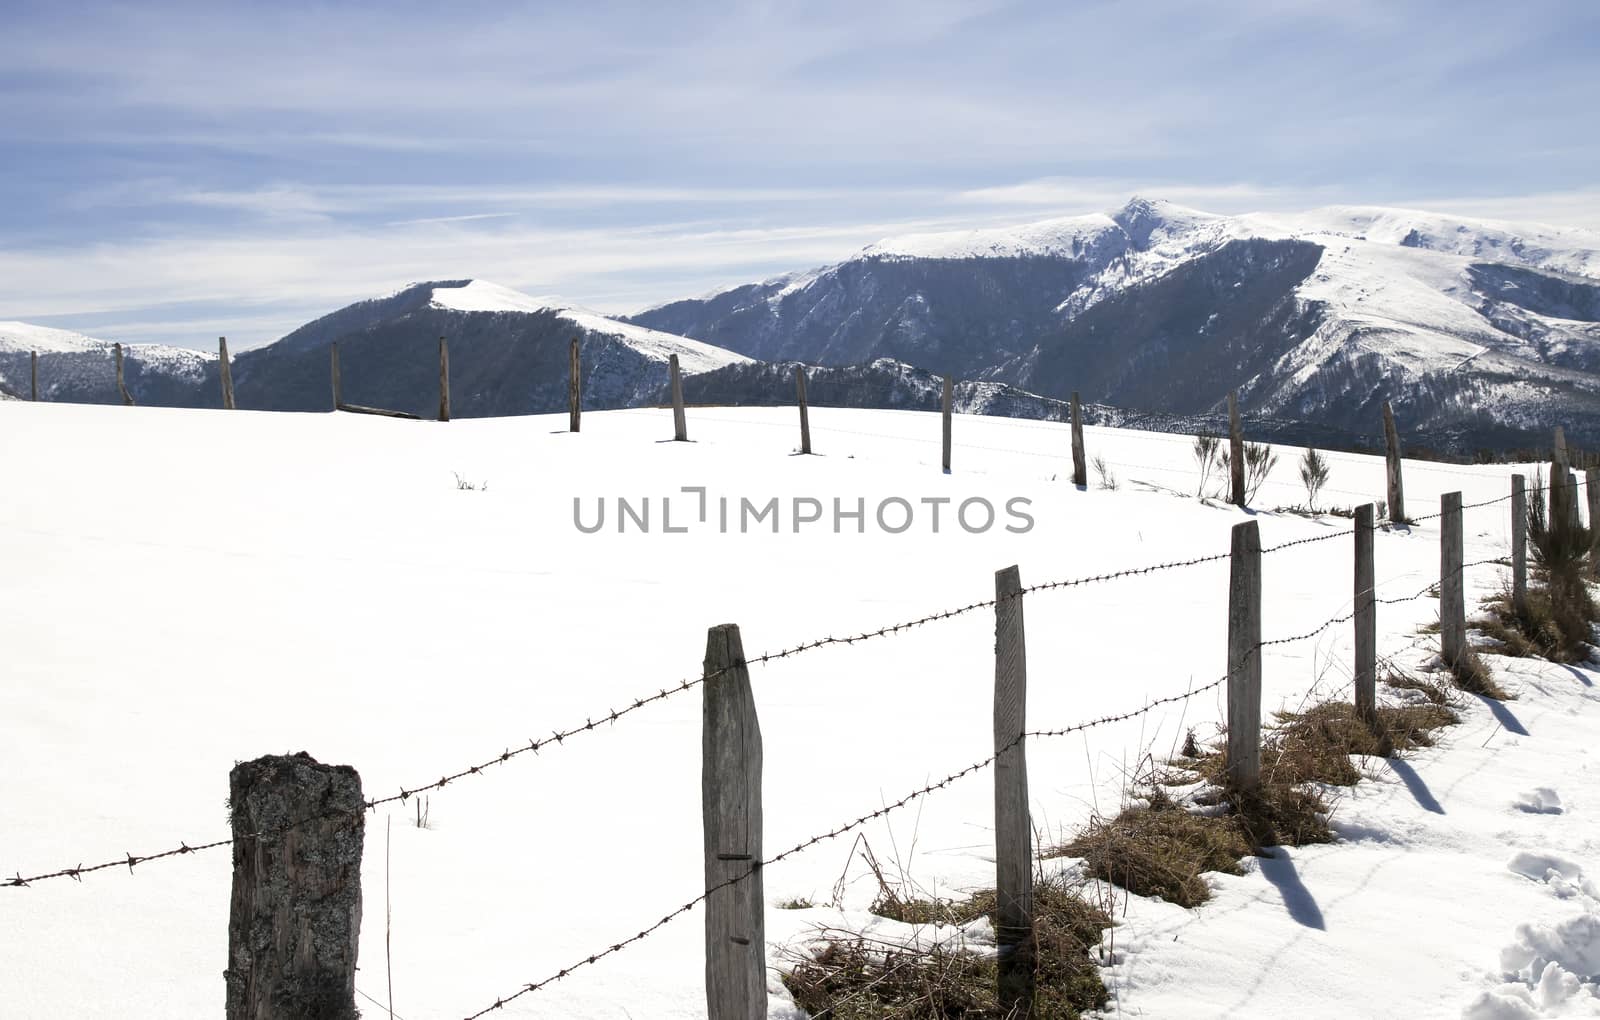 Snowy landscape with a fence in the foreground and mountains in the background. Copy space.